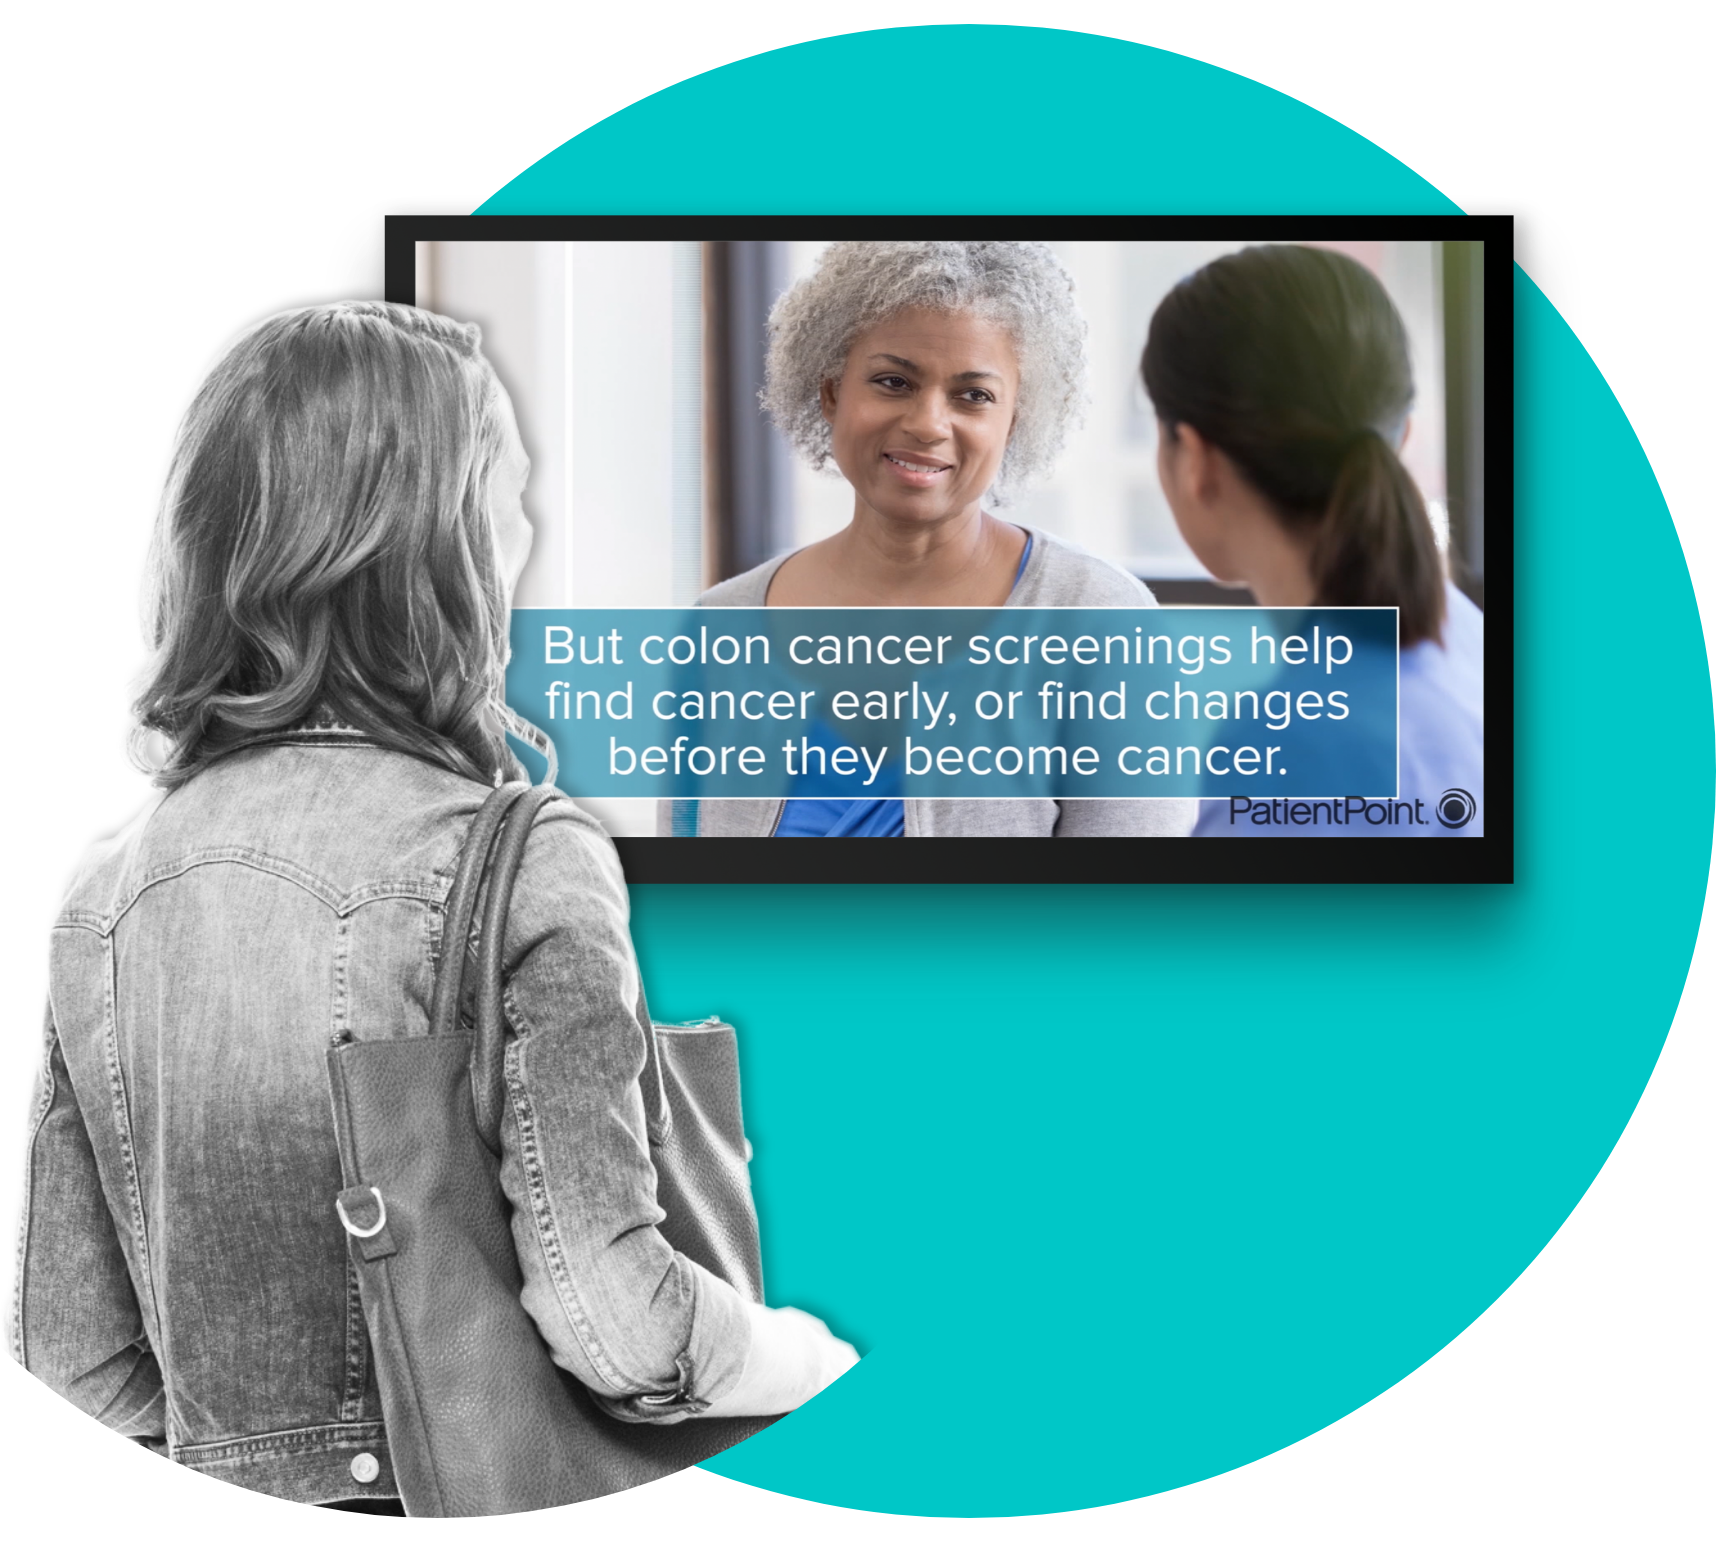 Woman watching a waiting room screen that says "But colon cancer screenings help find cancer early, or find changes before they become cancer."